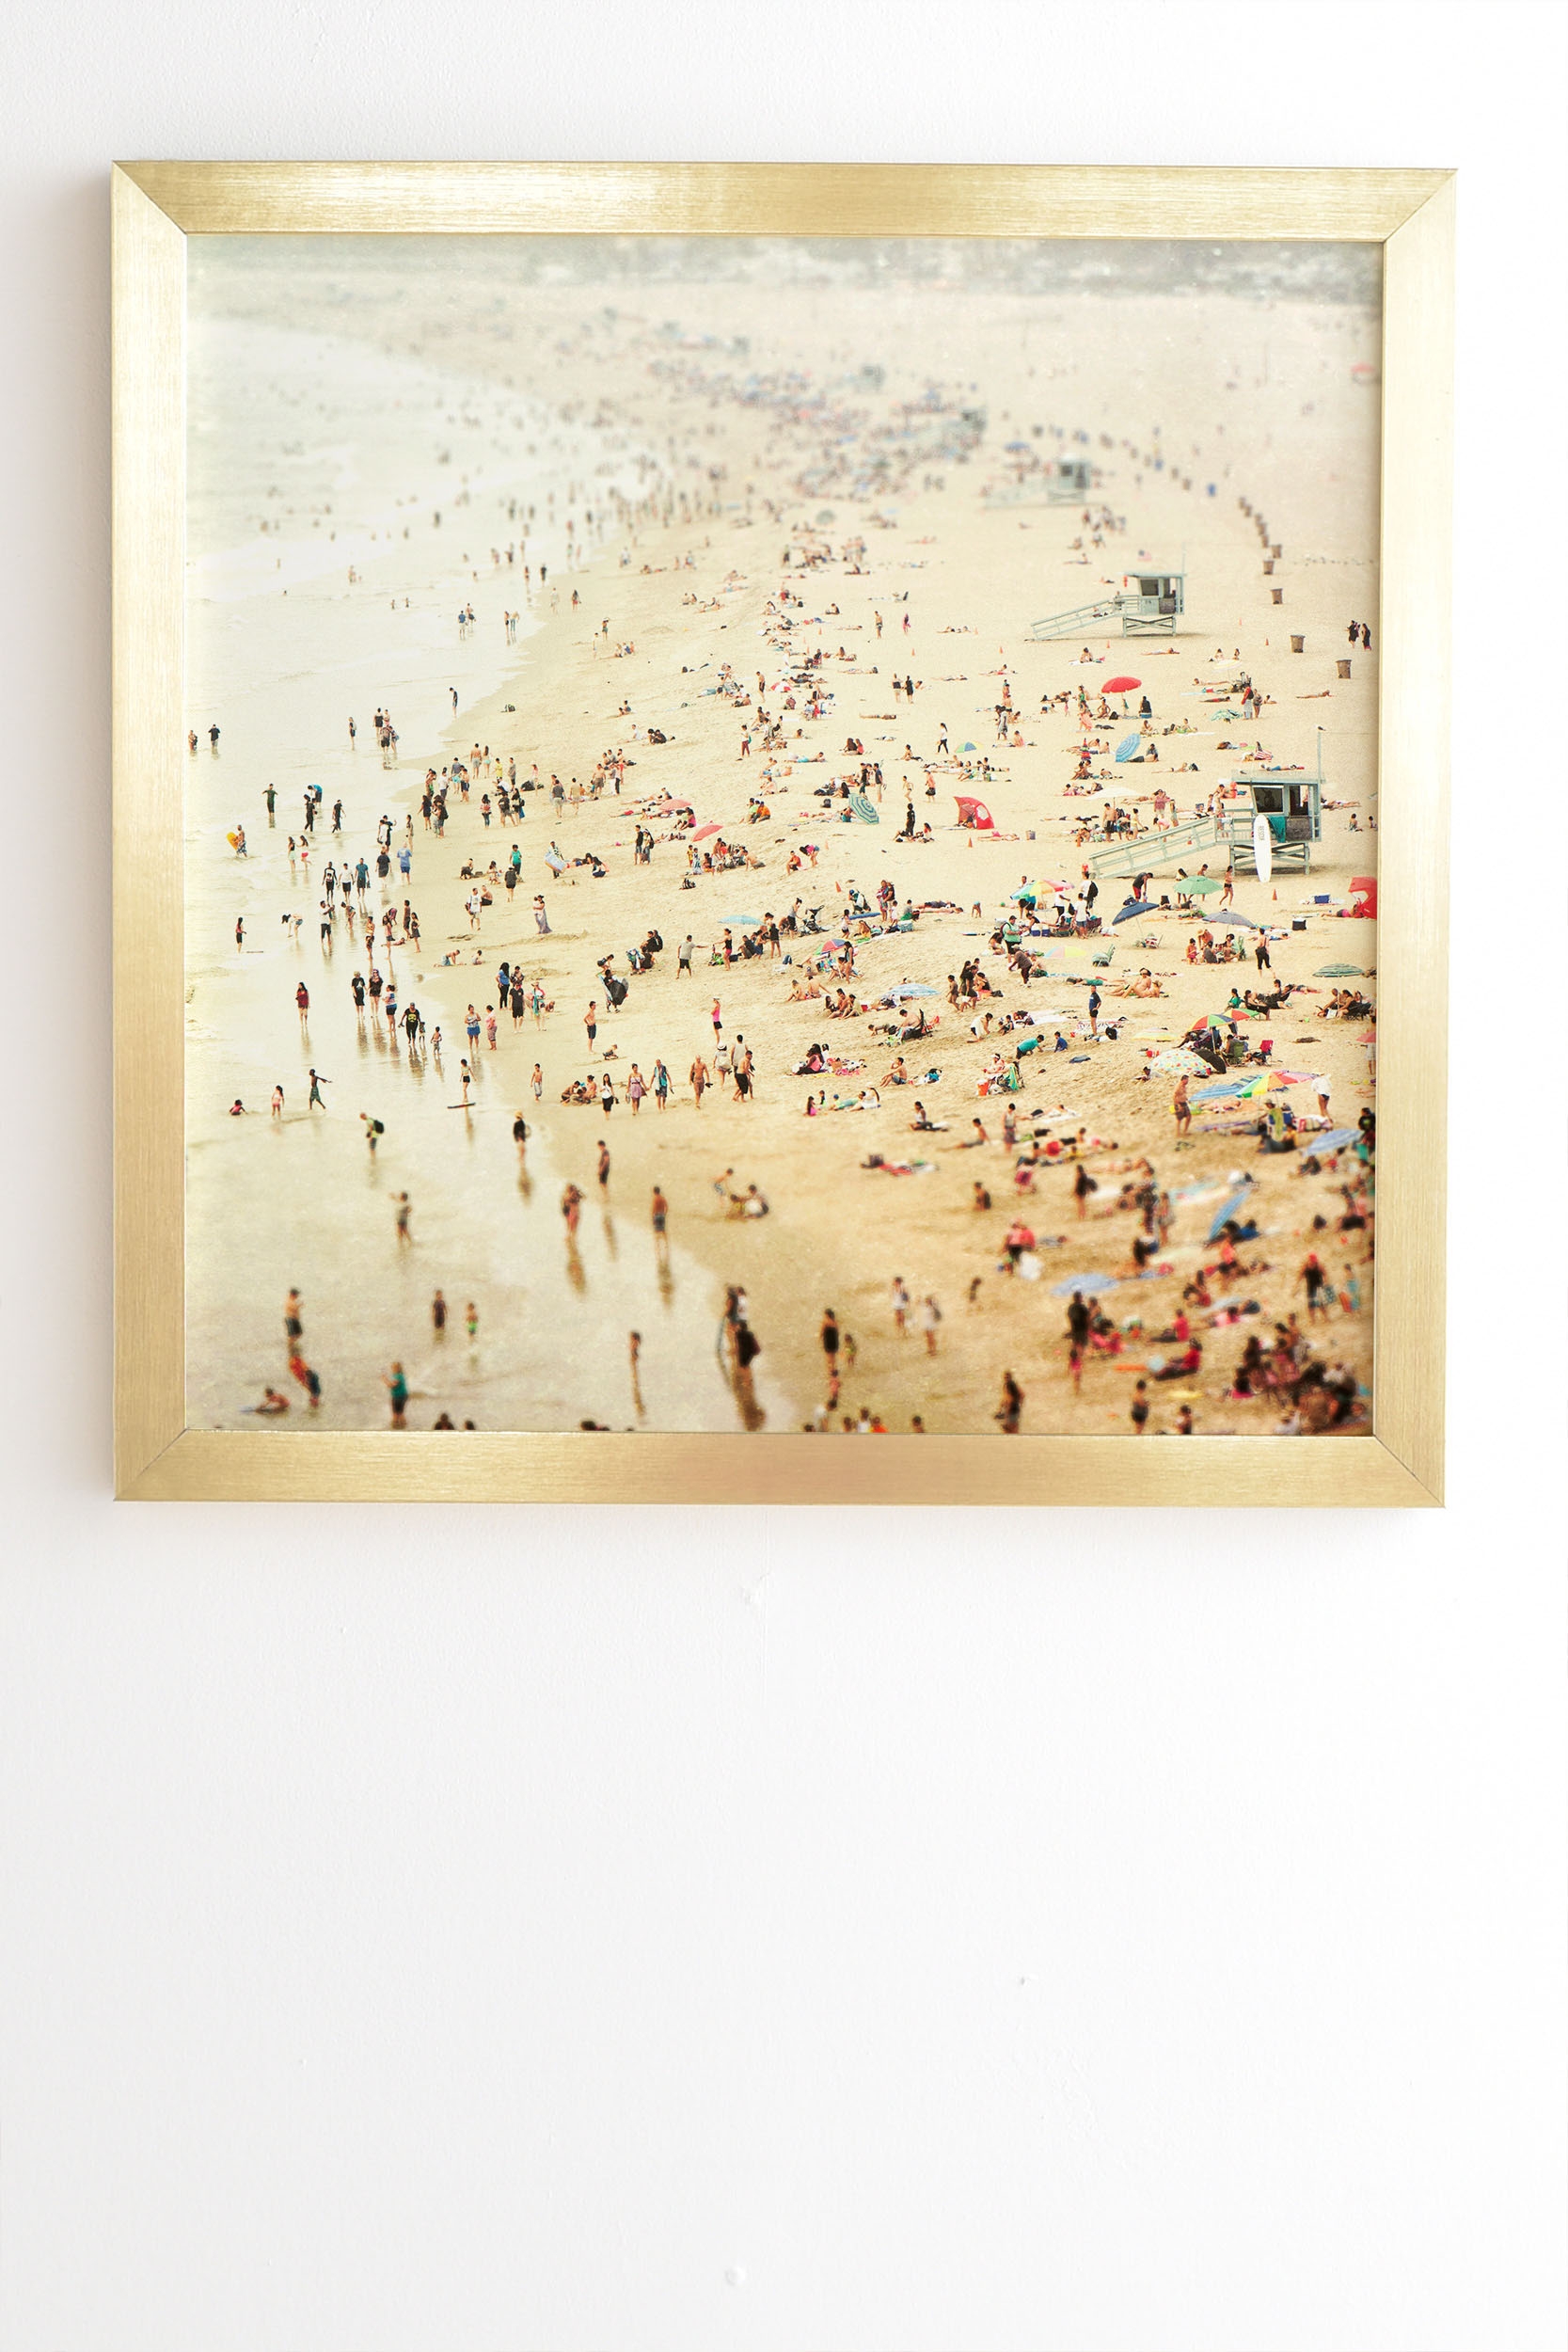 In The Crowd by Bree Madden - Framed Wall Art Basic Gold 19" x 22.4" - Image 1